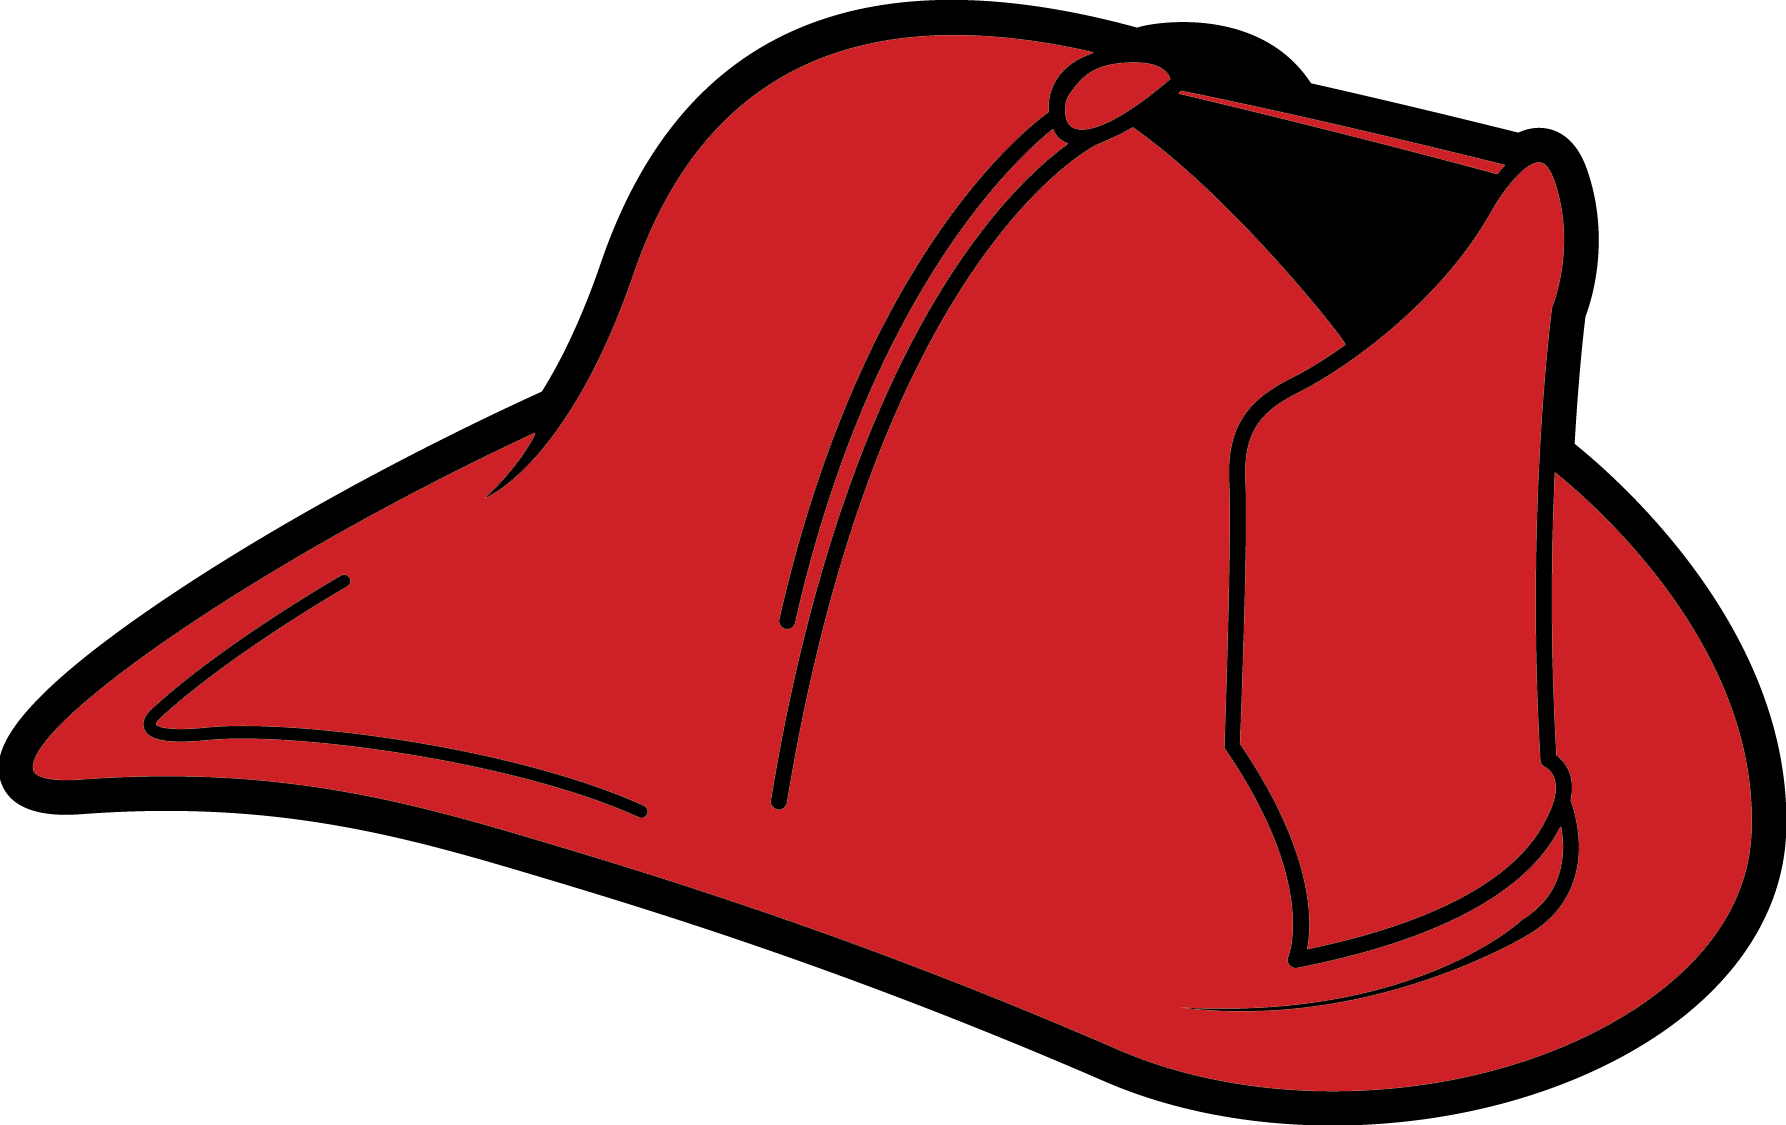 Fireman Helmet Free Cliparts That You Can Download To You Computer